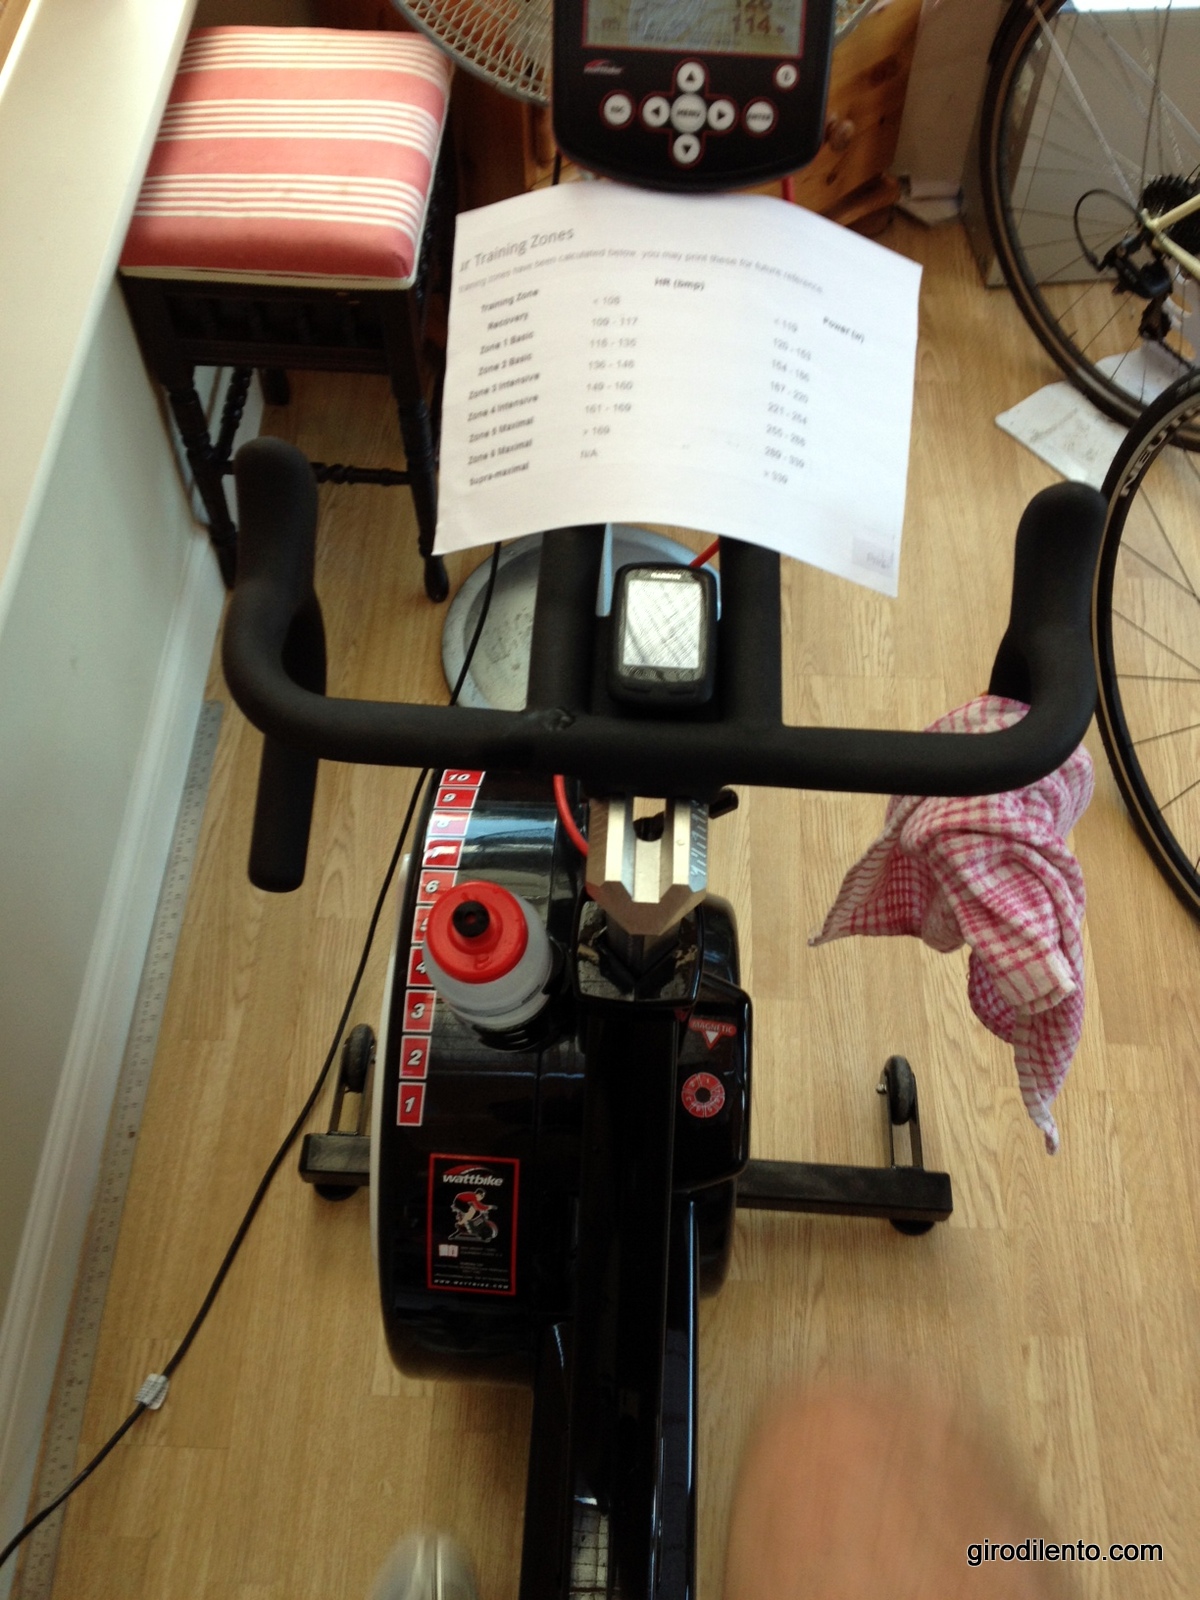 With my heart rate zones, my Garmin, a drink & a tea towel!